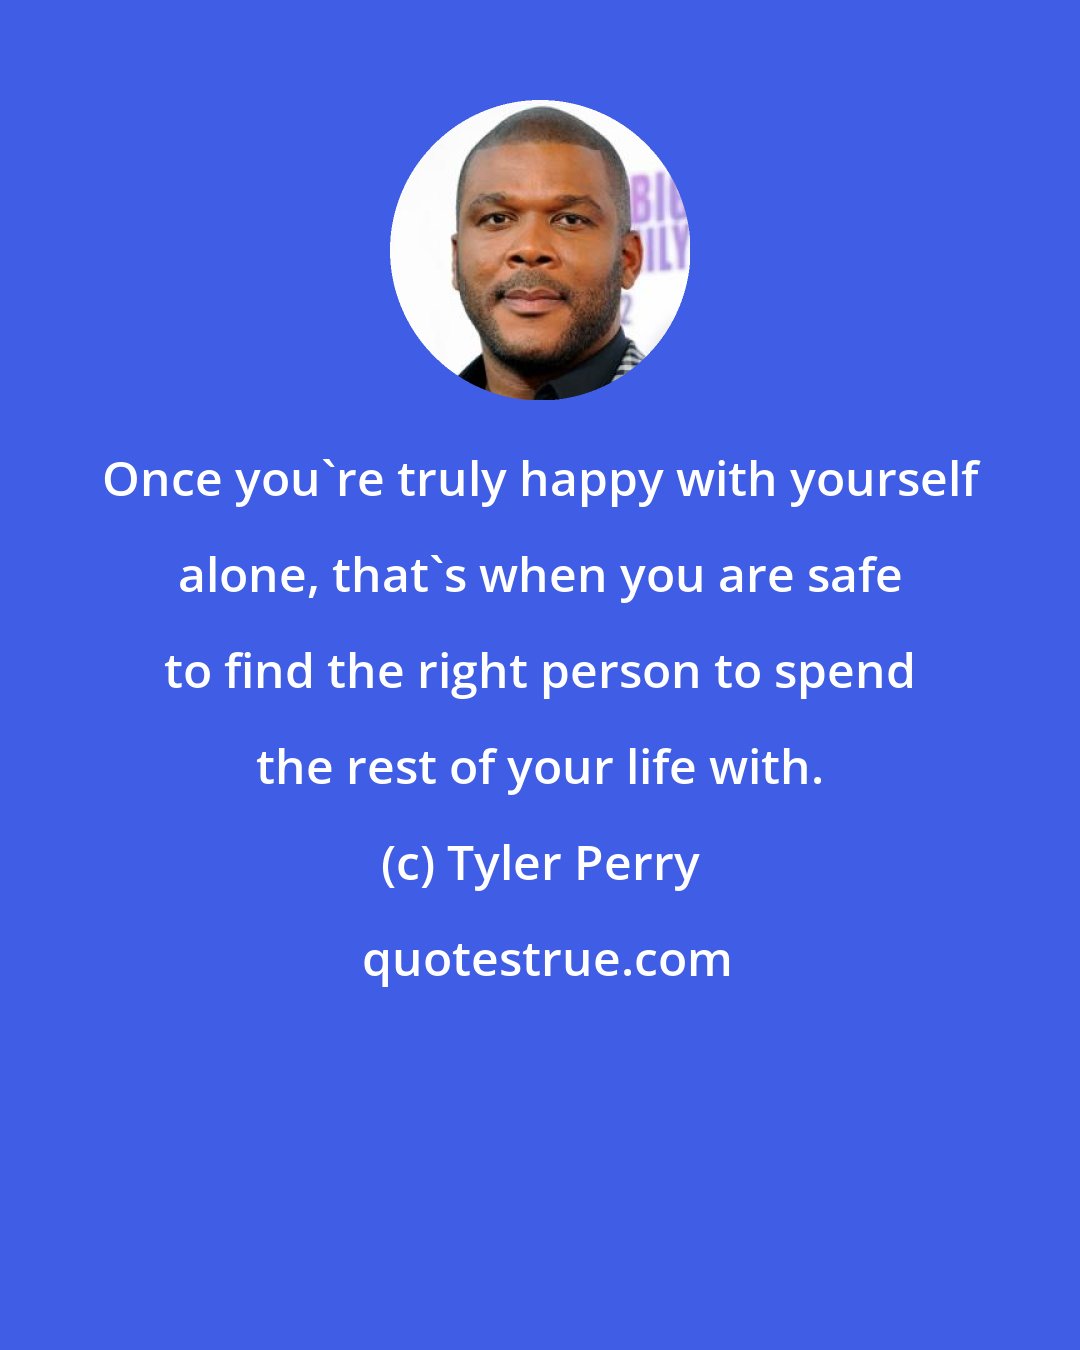 Tyler Perry: Once you're truly happy with yourself alone, that's when you are safe to find the right person to spend the rest of your life with.